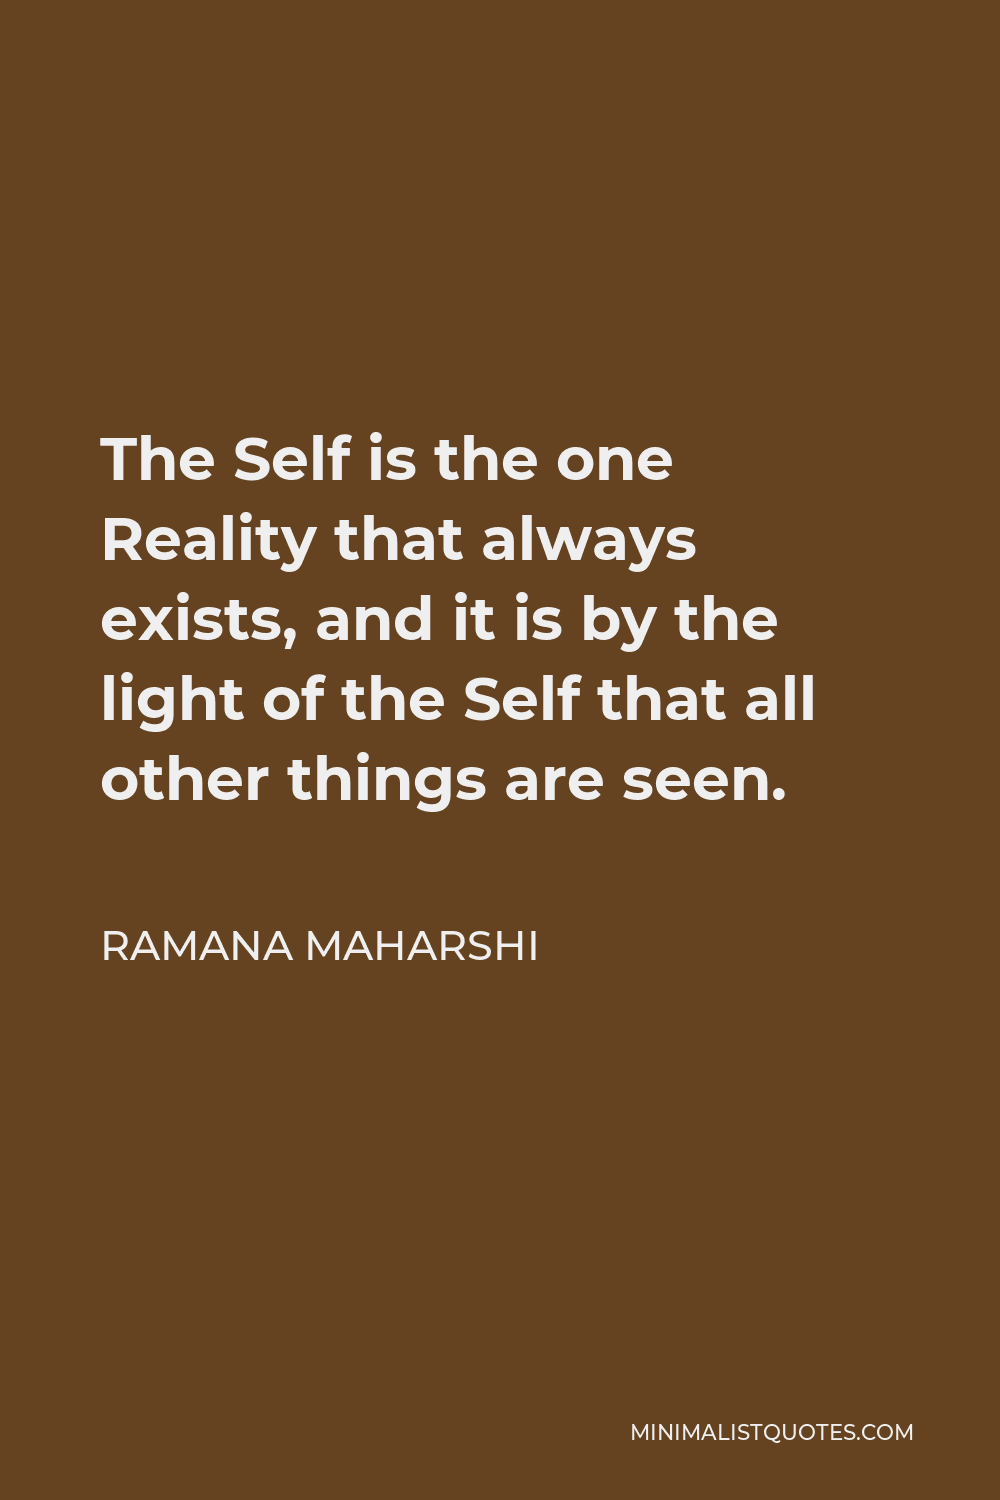 Ramana Maharshi Quote - The Self is the one Reality that always exists, and it is by the light of the Self that all other things are seen.